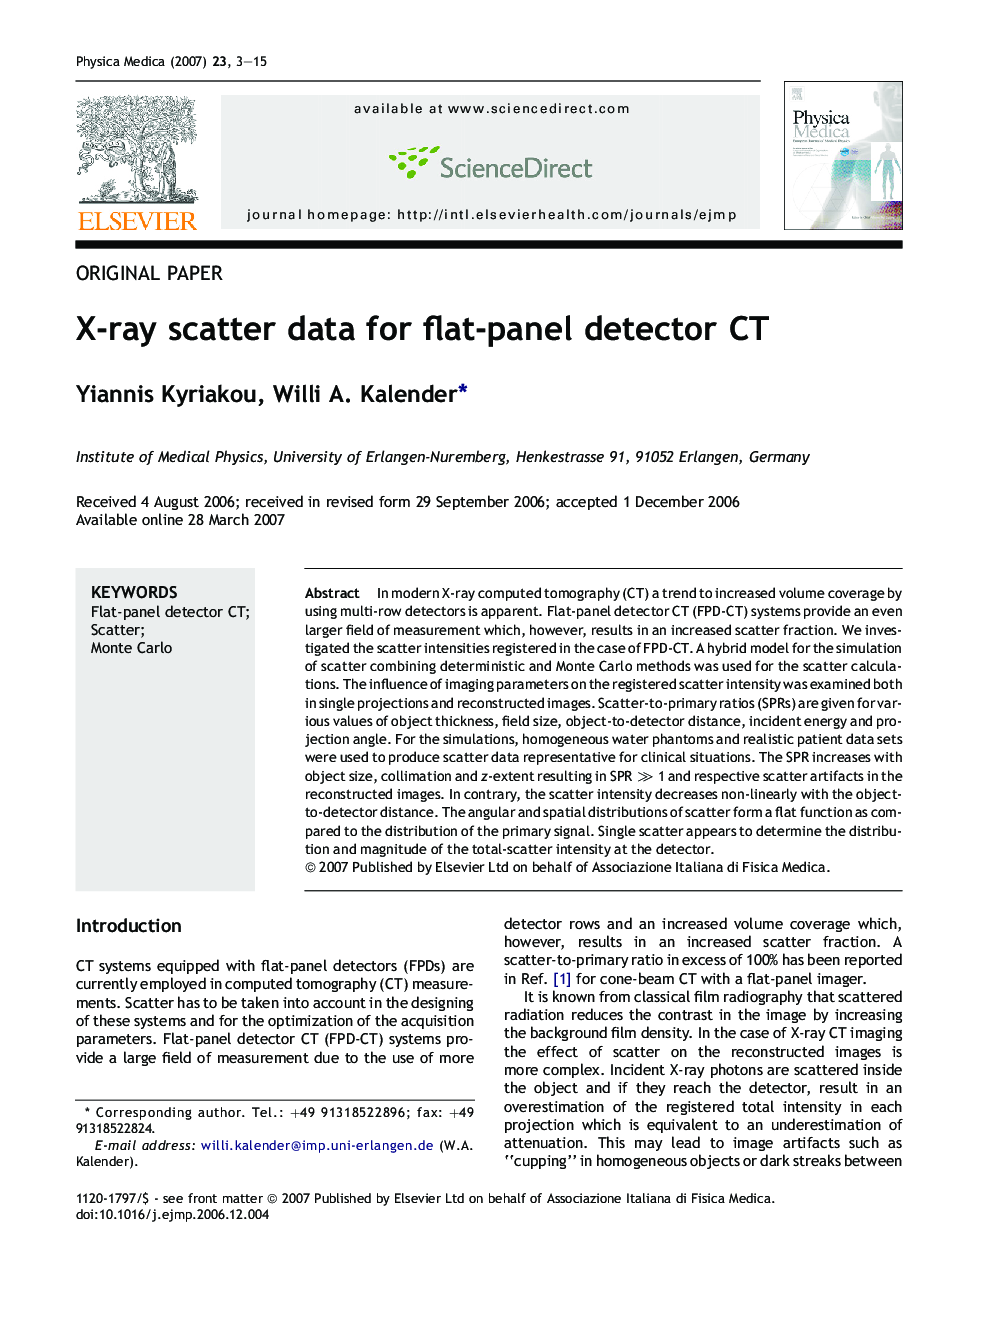 X-ray scatter data for flat-panel detector CT